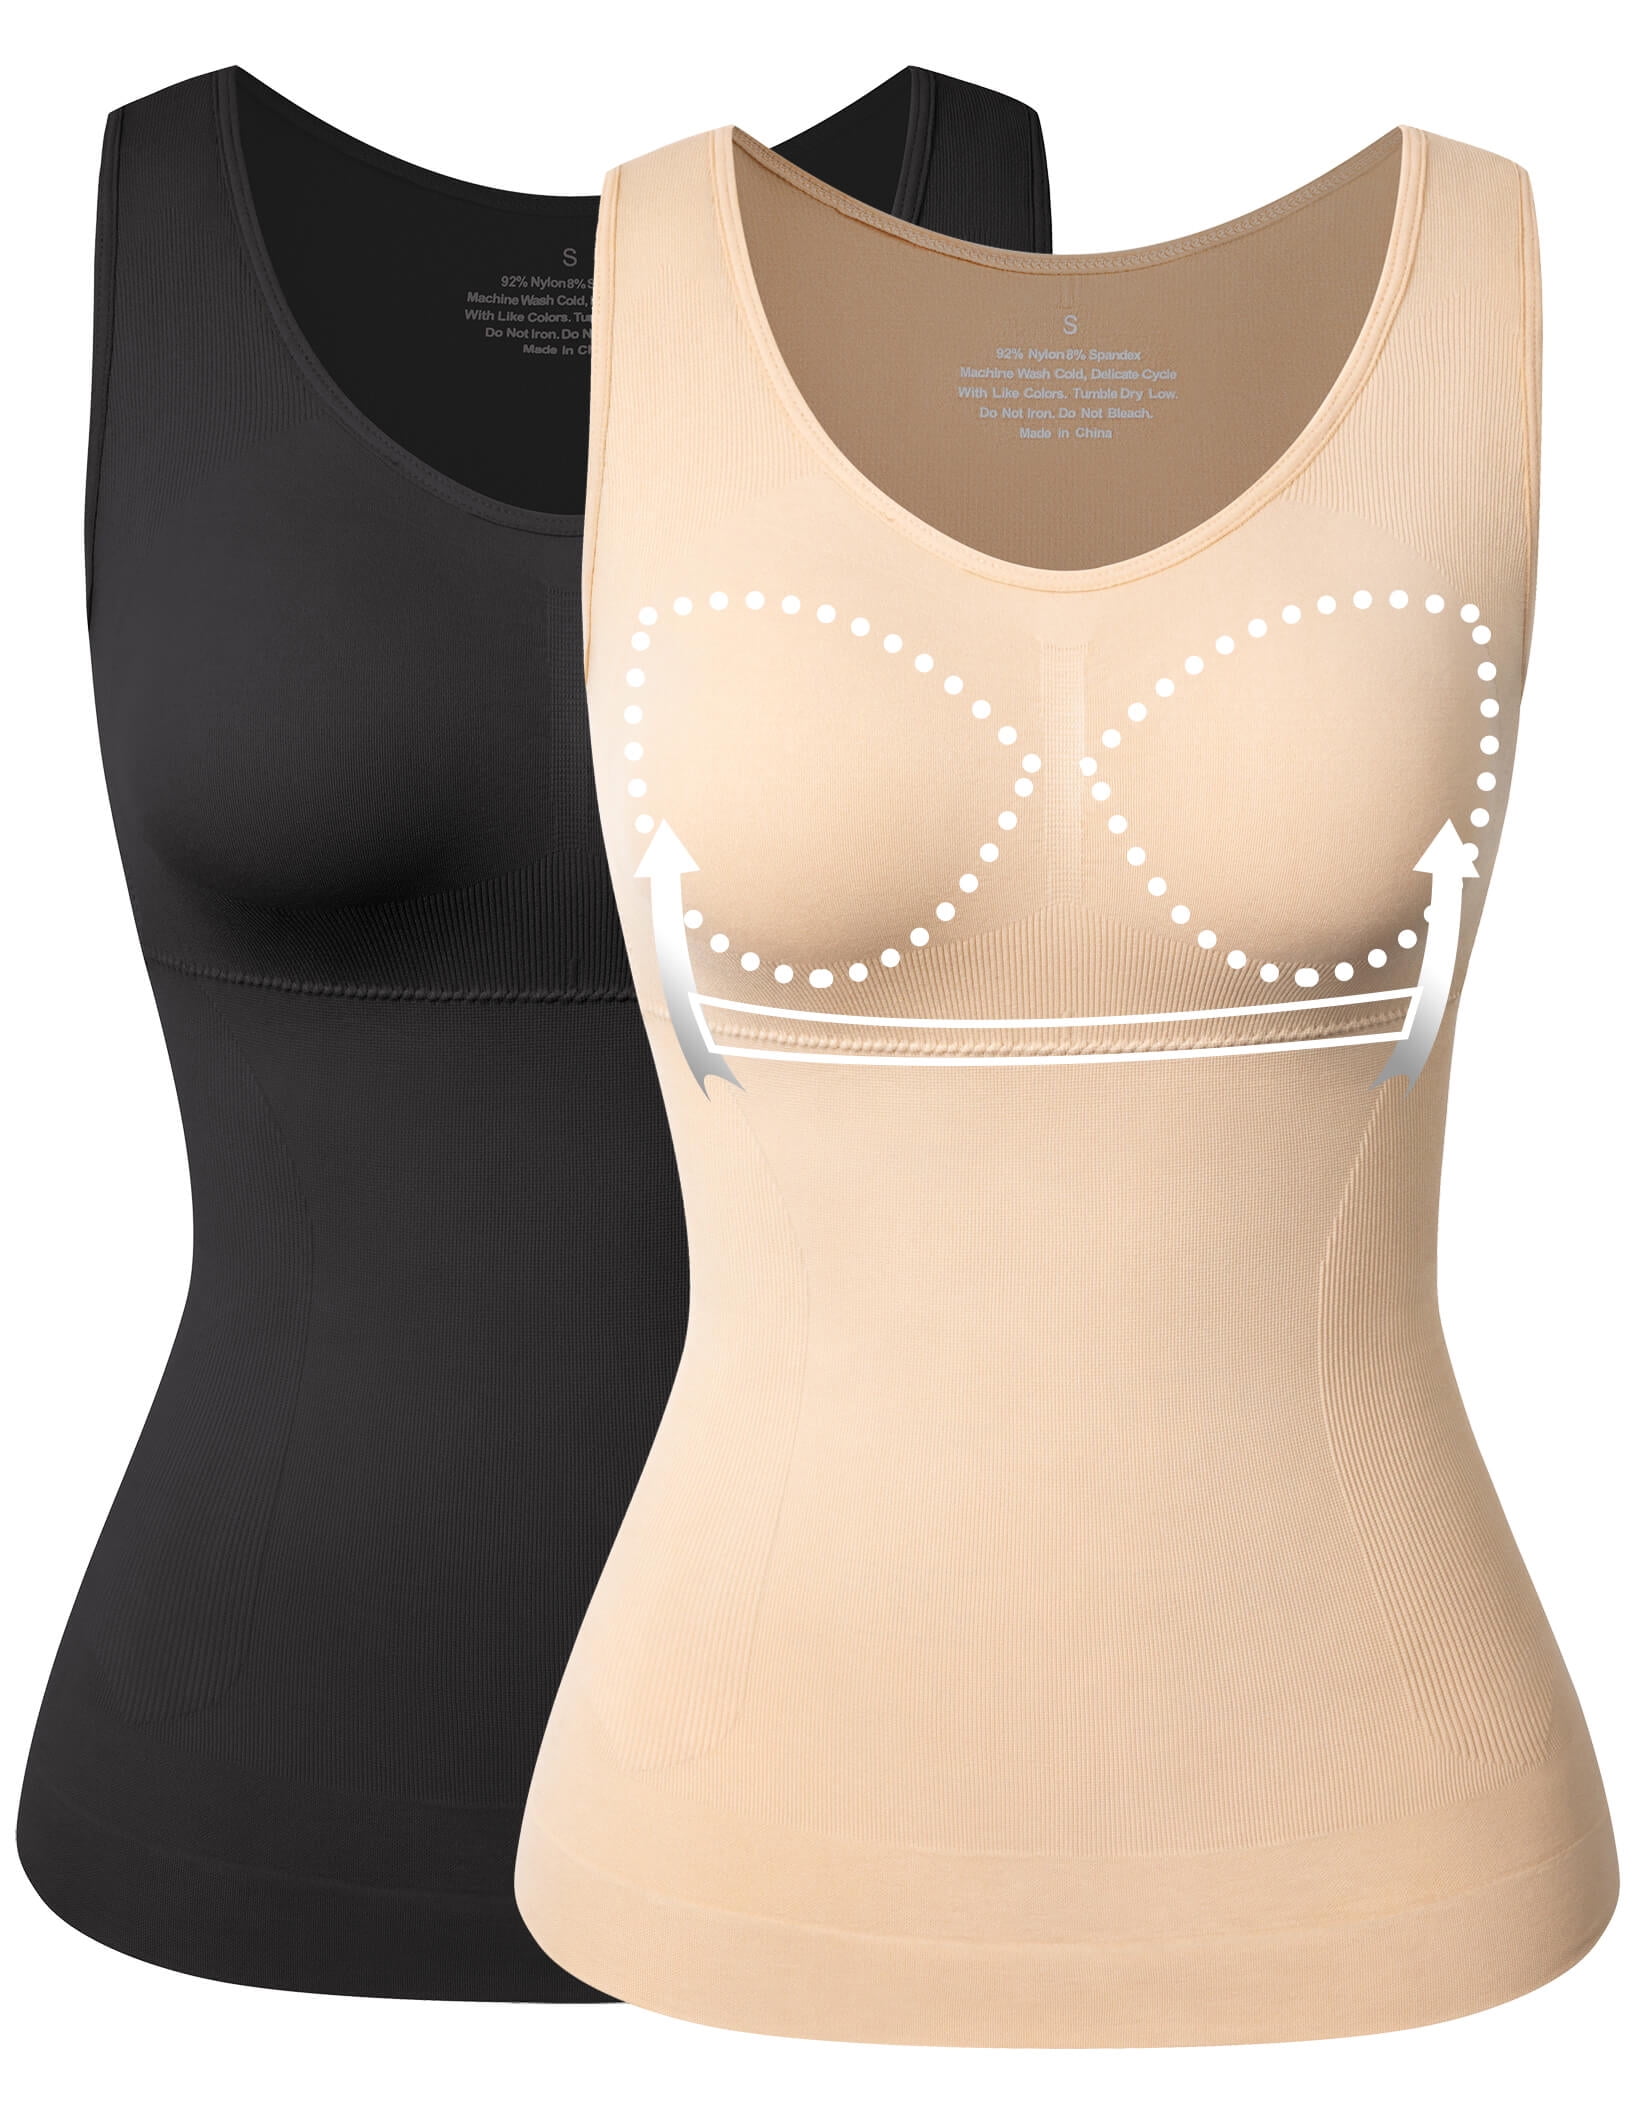 ATTLADY Women Seamless Compression Cami Shapewear Tops with